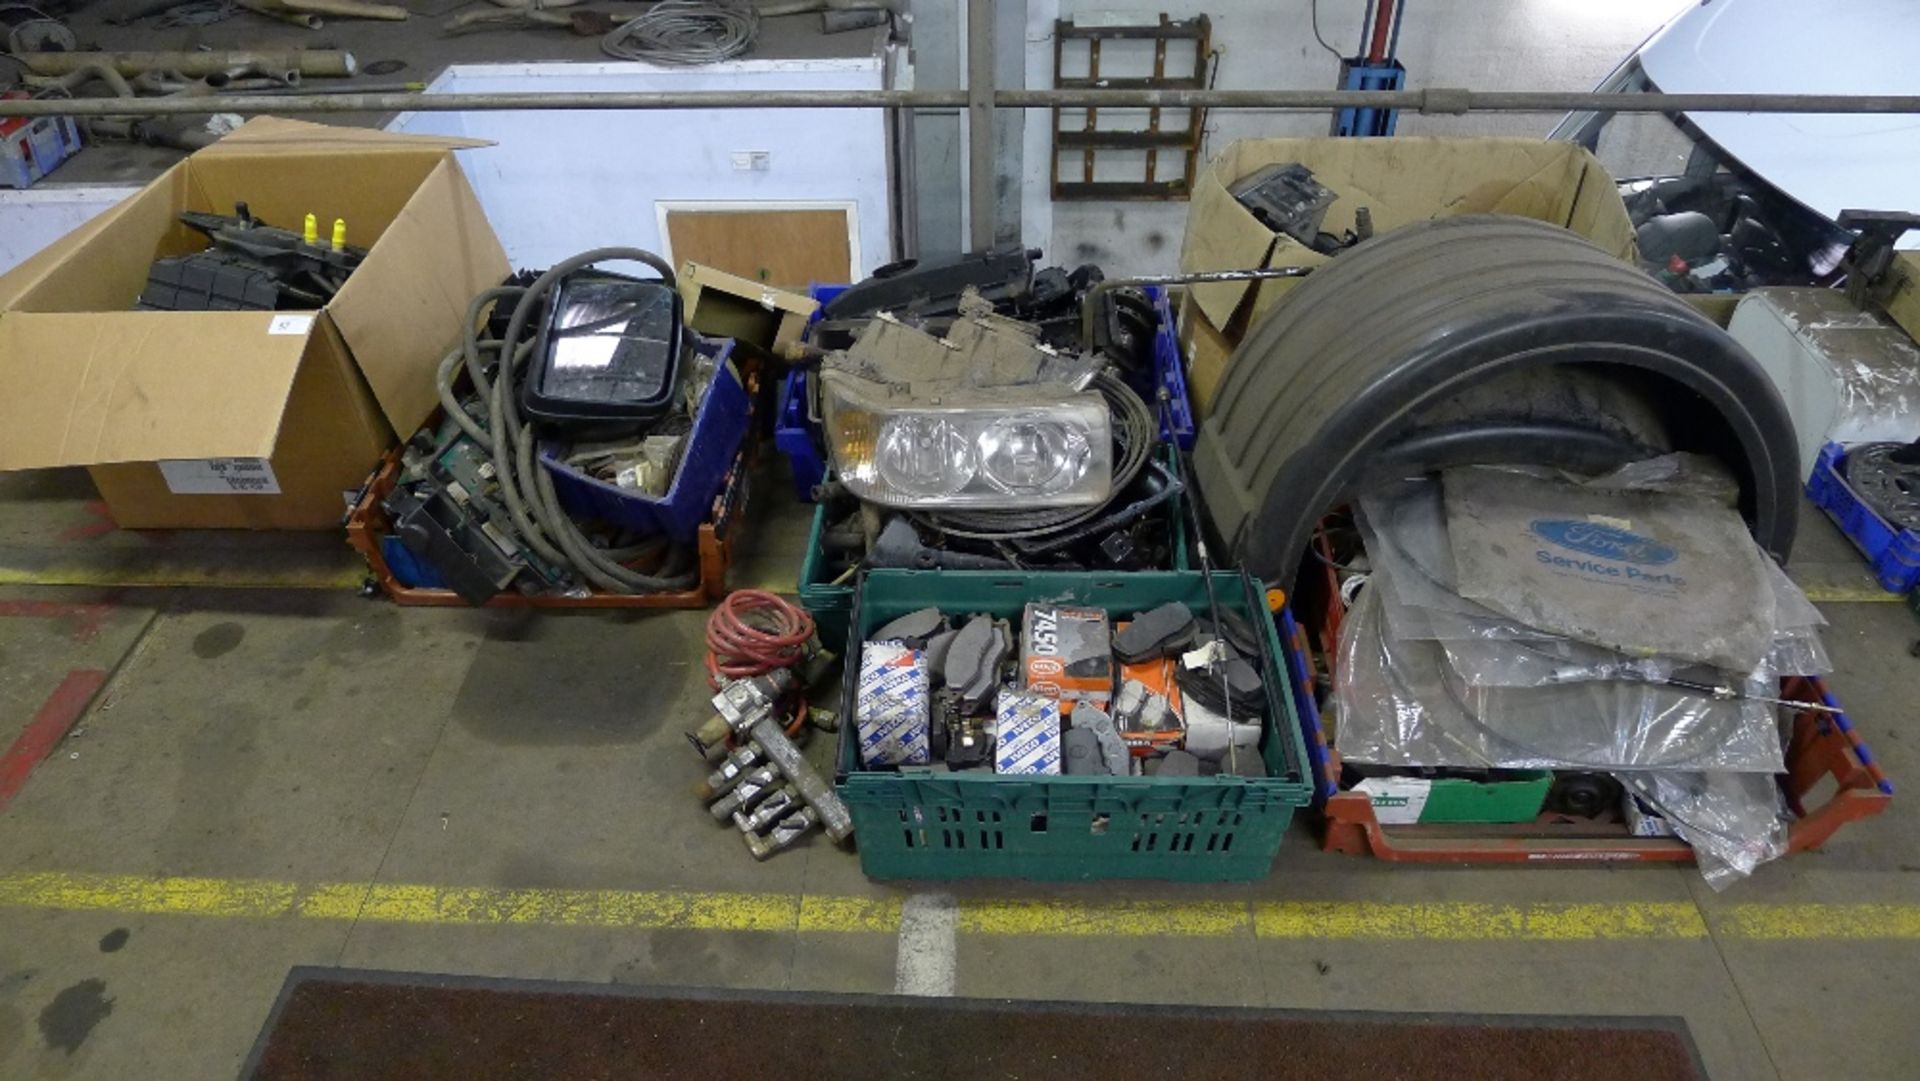 A quantity of various items including commercial vehicle spares etc. Not practical to list in